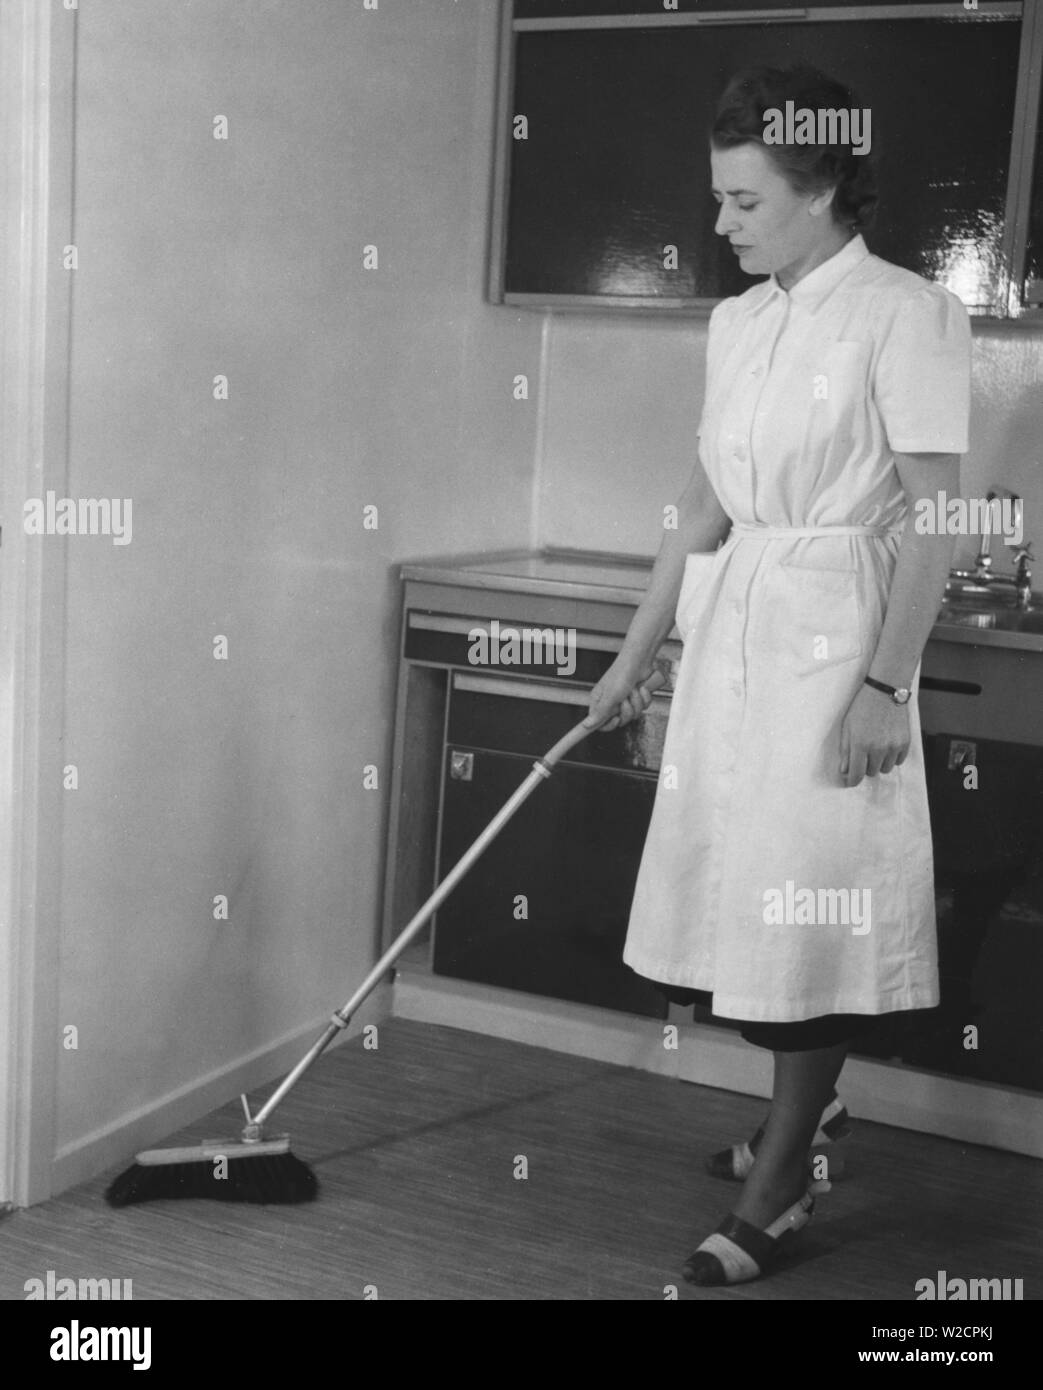 Cleaning day in the 1950s. A young woman dressed in a practical cleaning outfit,  is cleaning the kitchen and is using a brush with an telescoping handle. A new invention to stand up straight when dusting and avoid back pains. Sweden 1950 Stock Photo